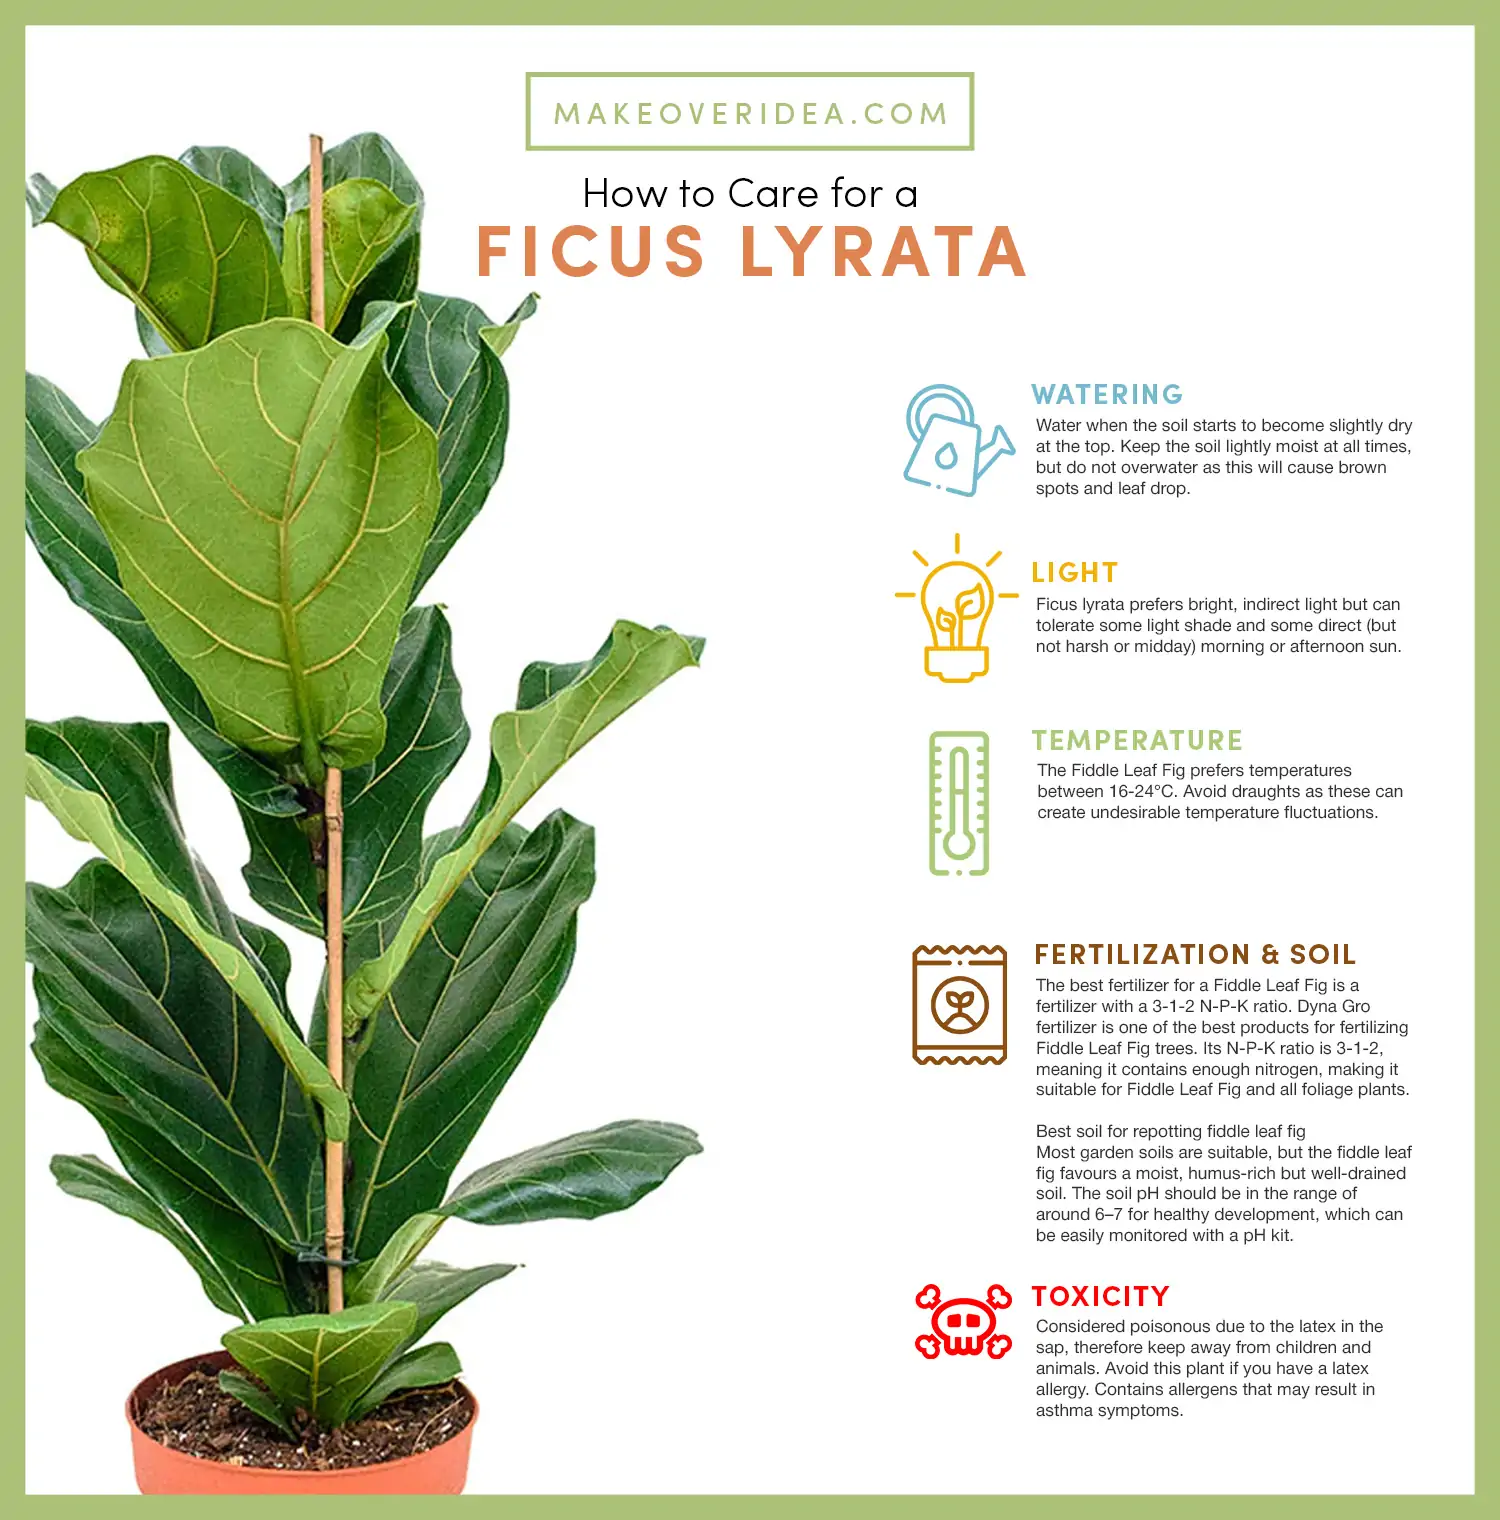 ficus lyrata fiddle leaf fig requirements how to care chart